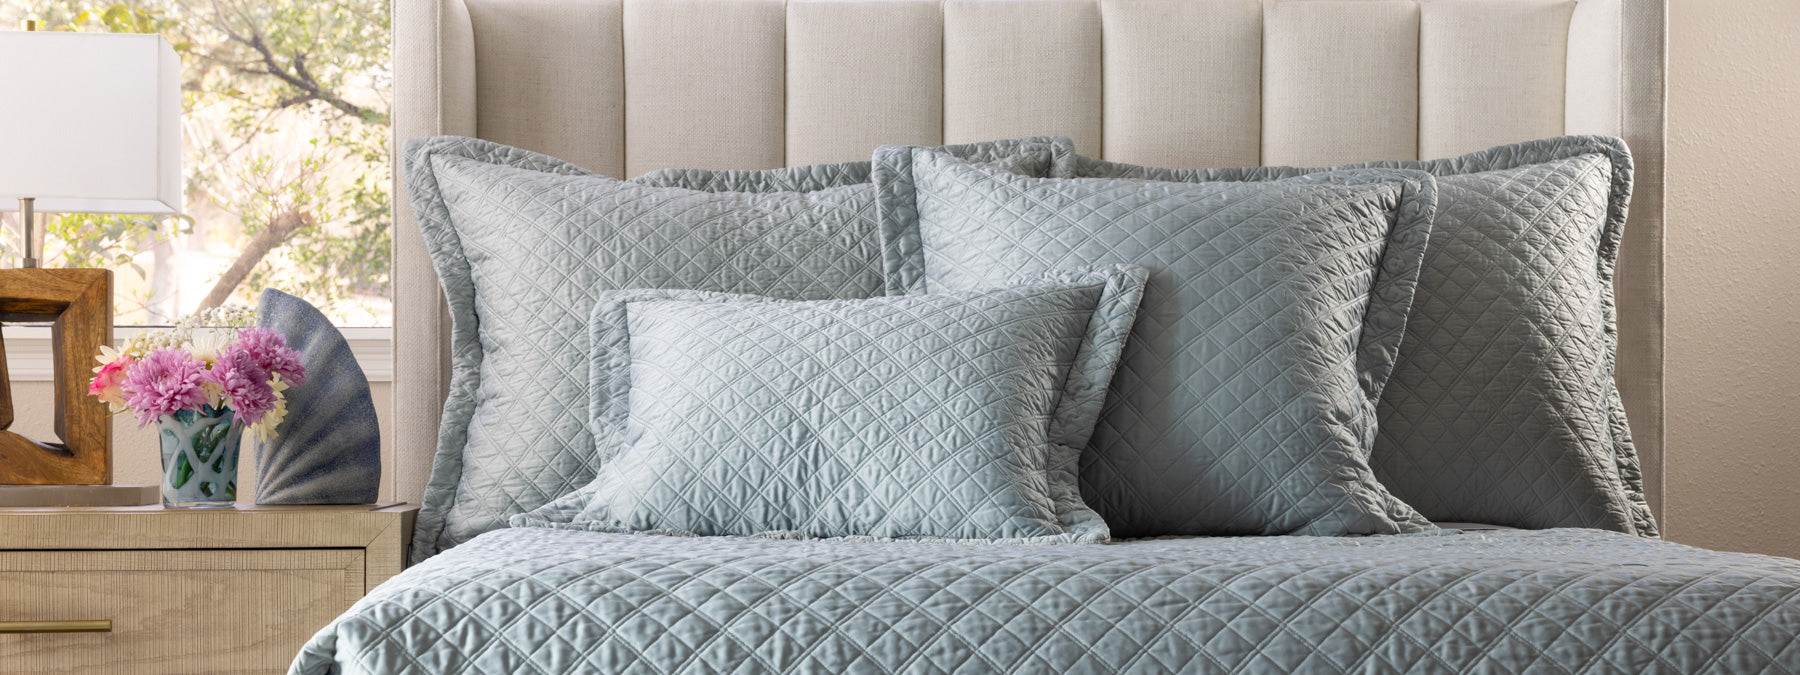 Silk & Sensibility Diamond-Quilted Blue Coverlets & Pillows by Lili 